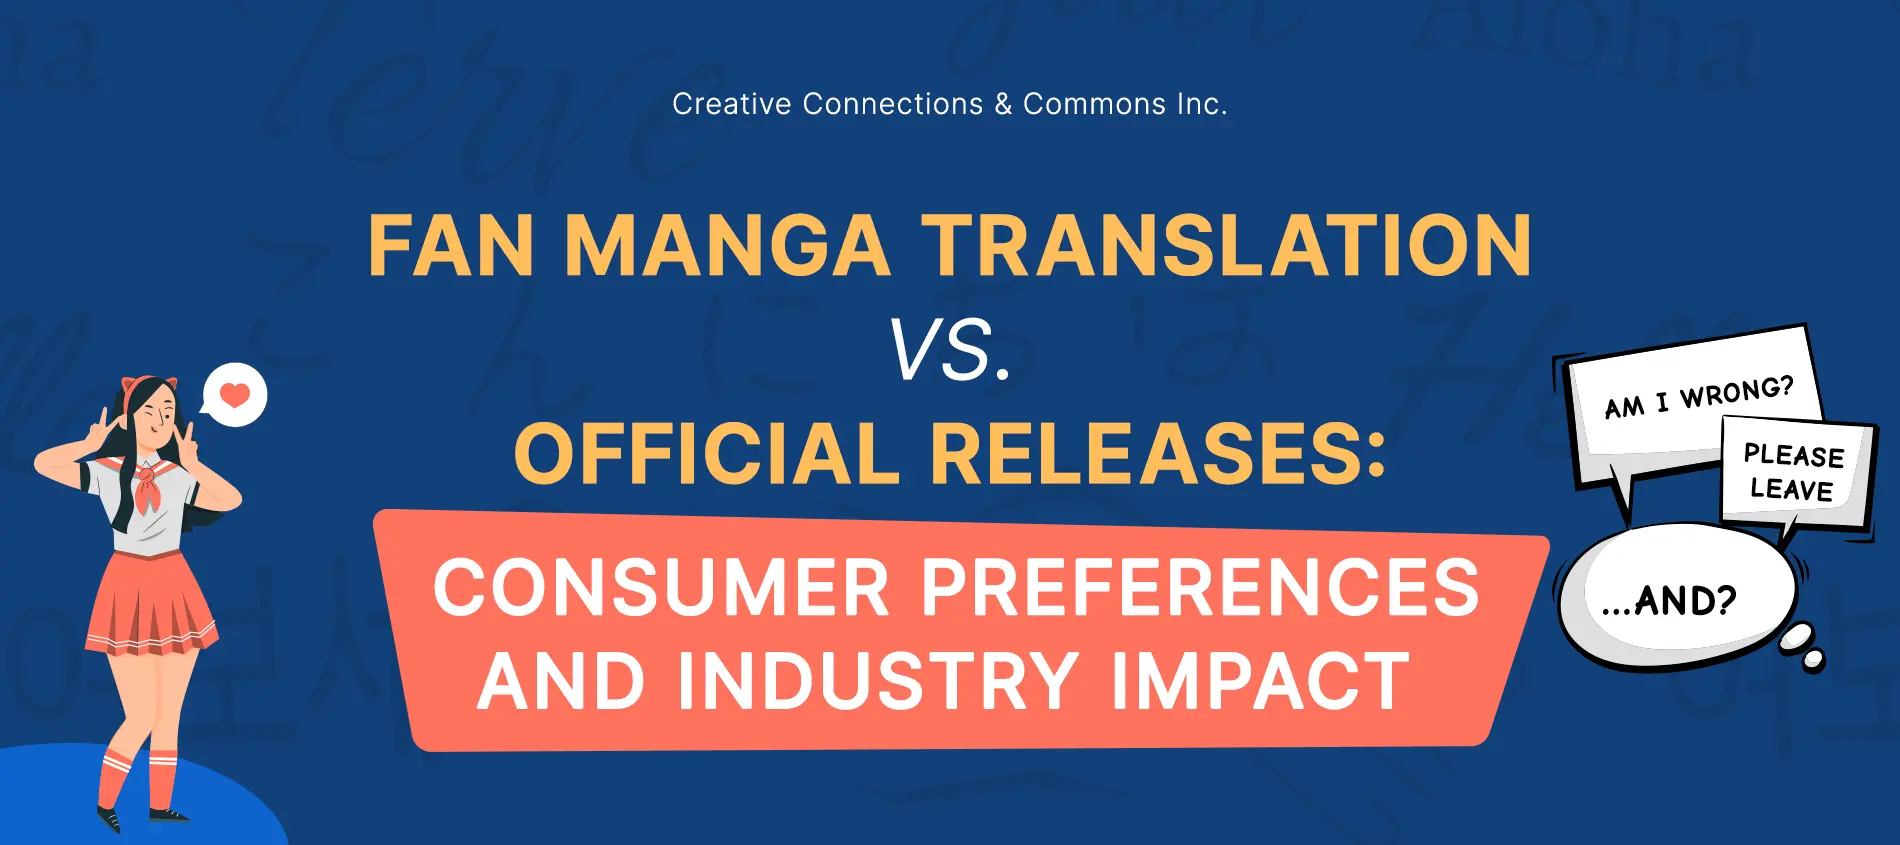 Fan Manga Translation vs. Official Releases Consumer Preferences and Industry Impact